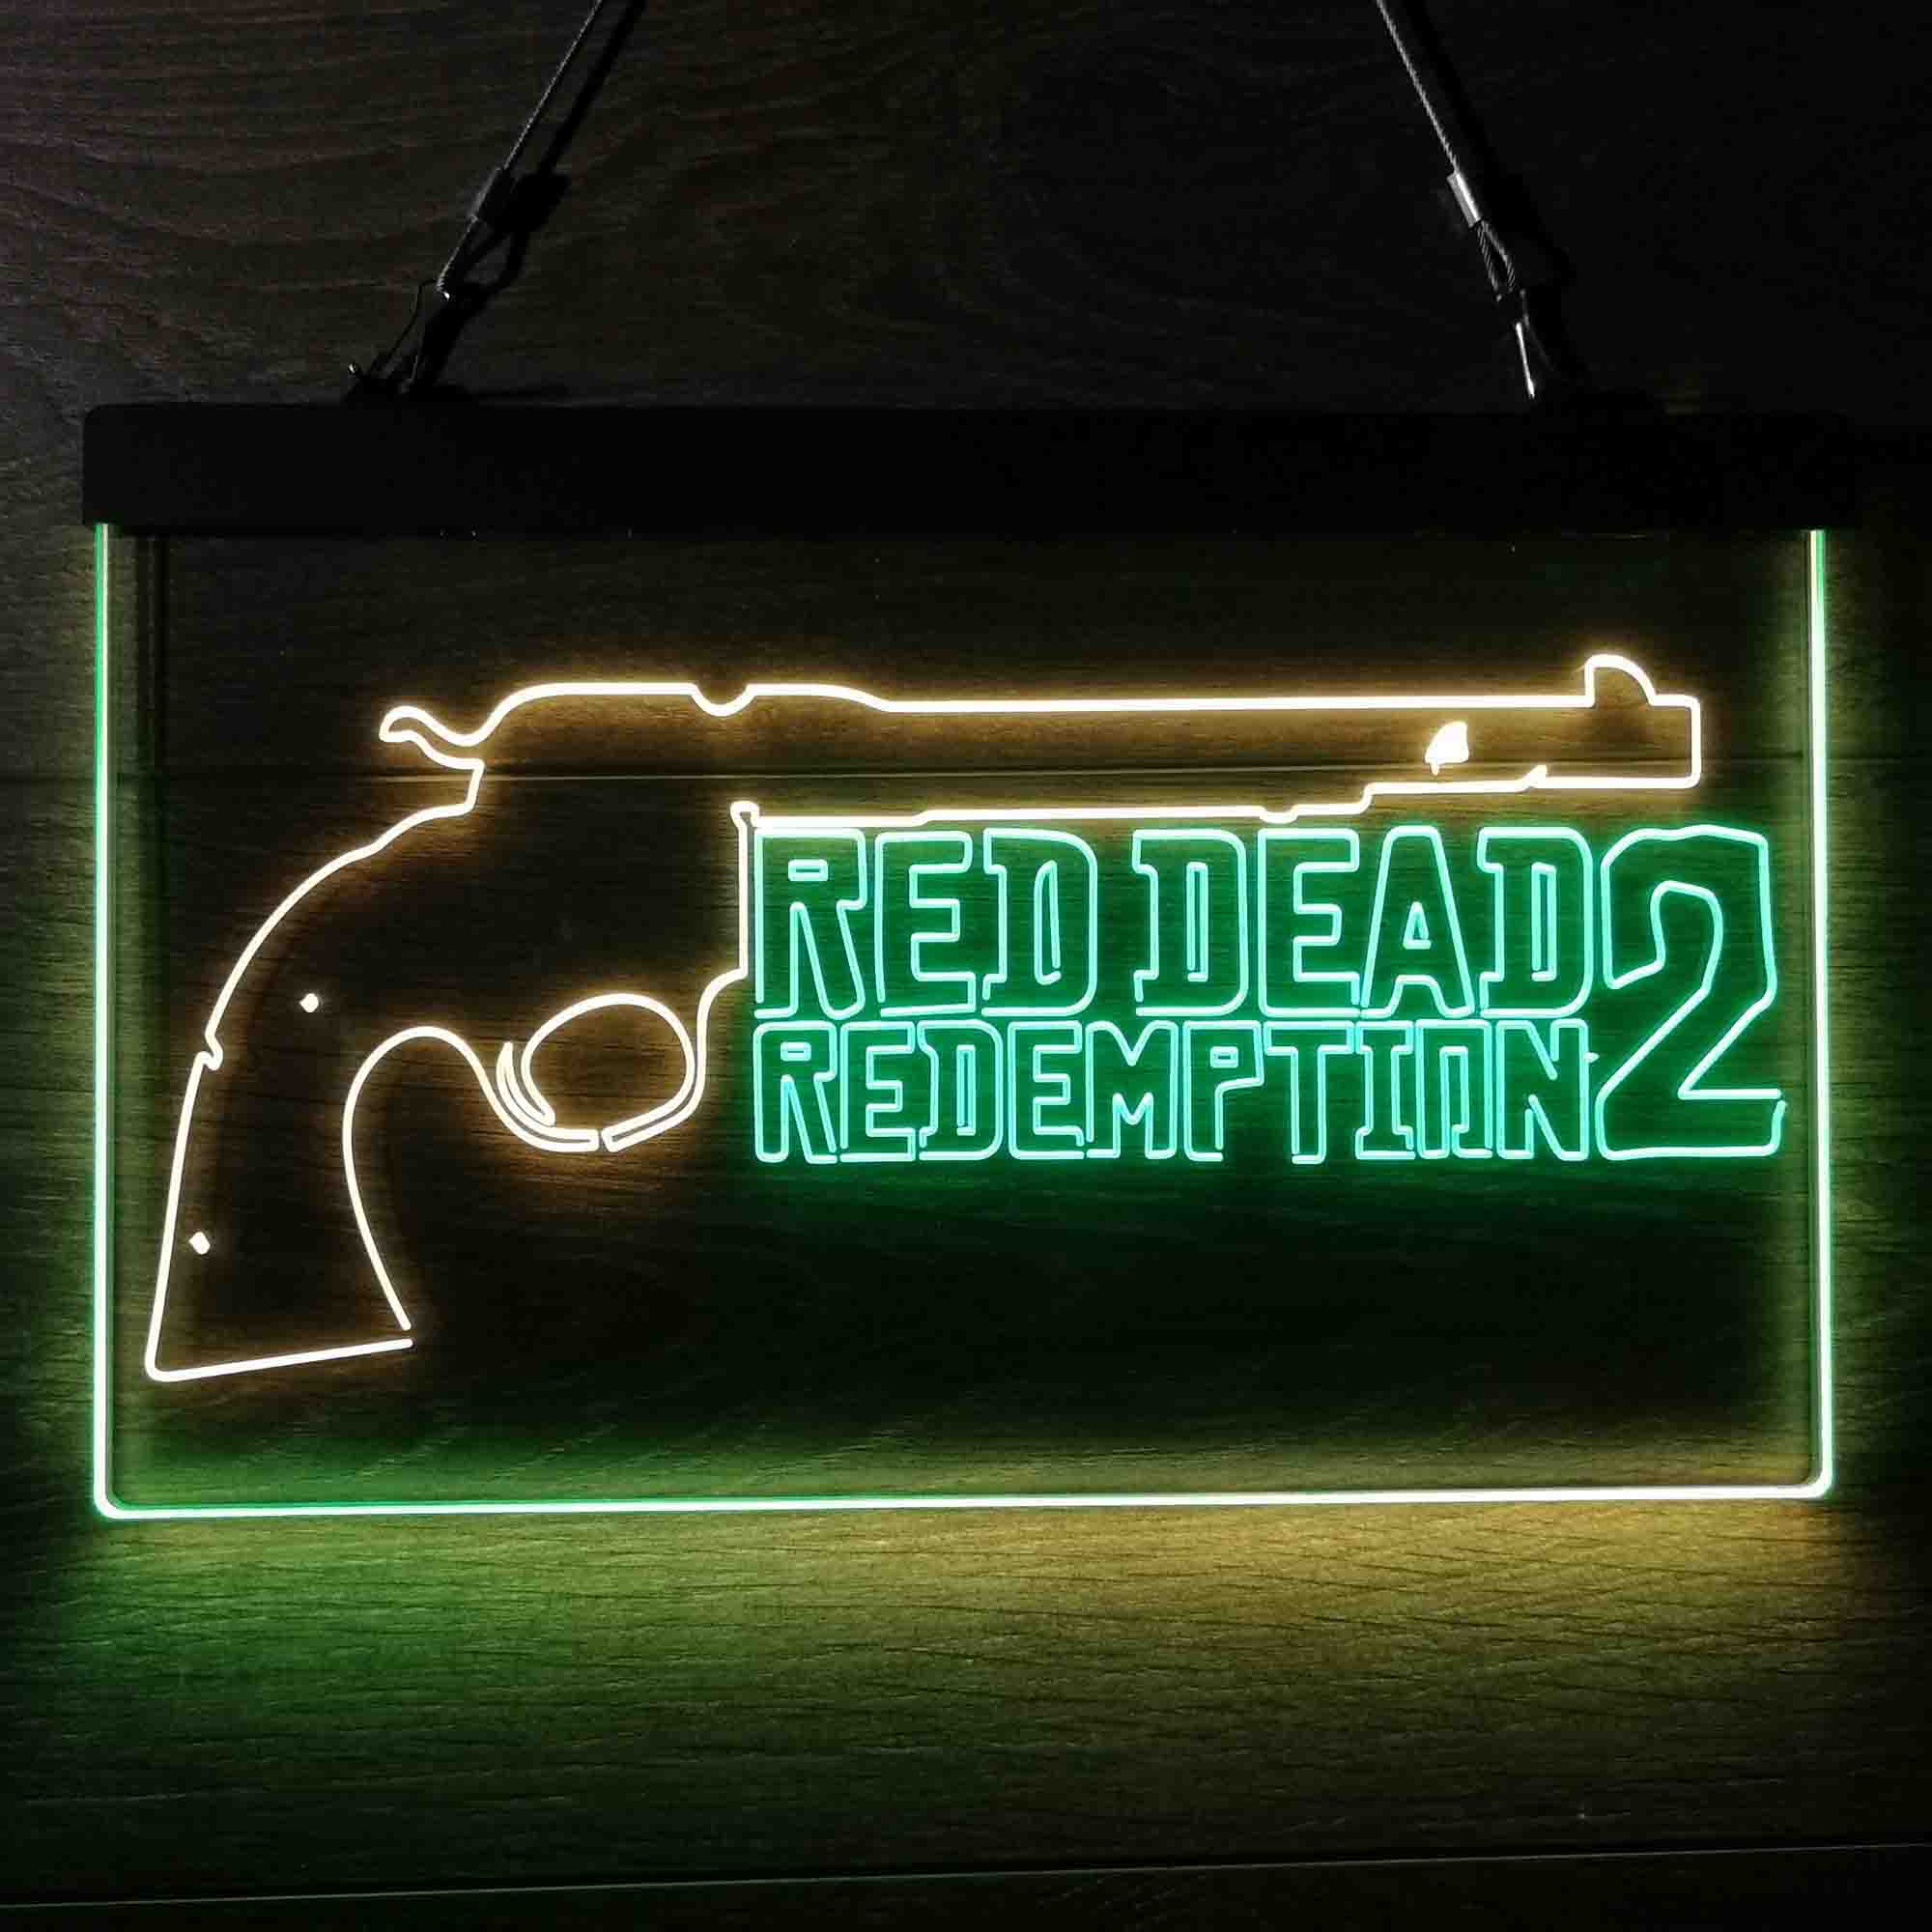 Red Dead Redemption 2 Neon LED Sign